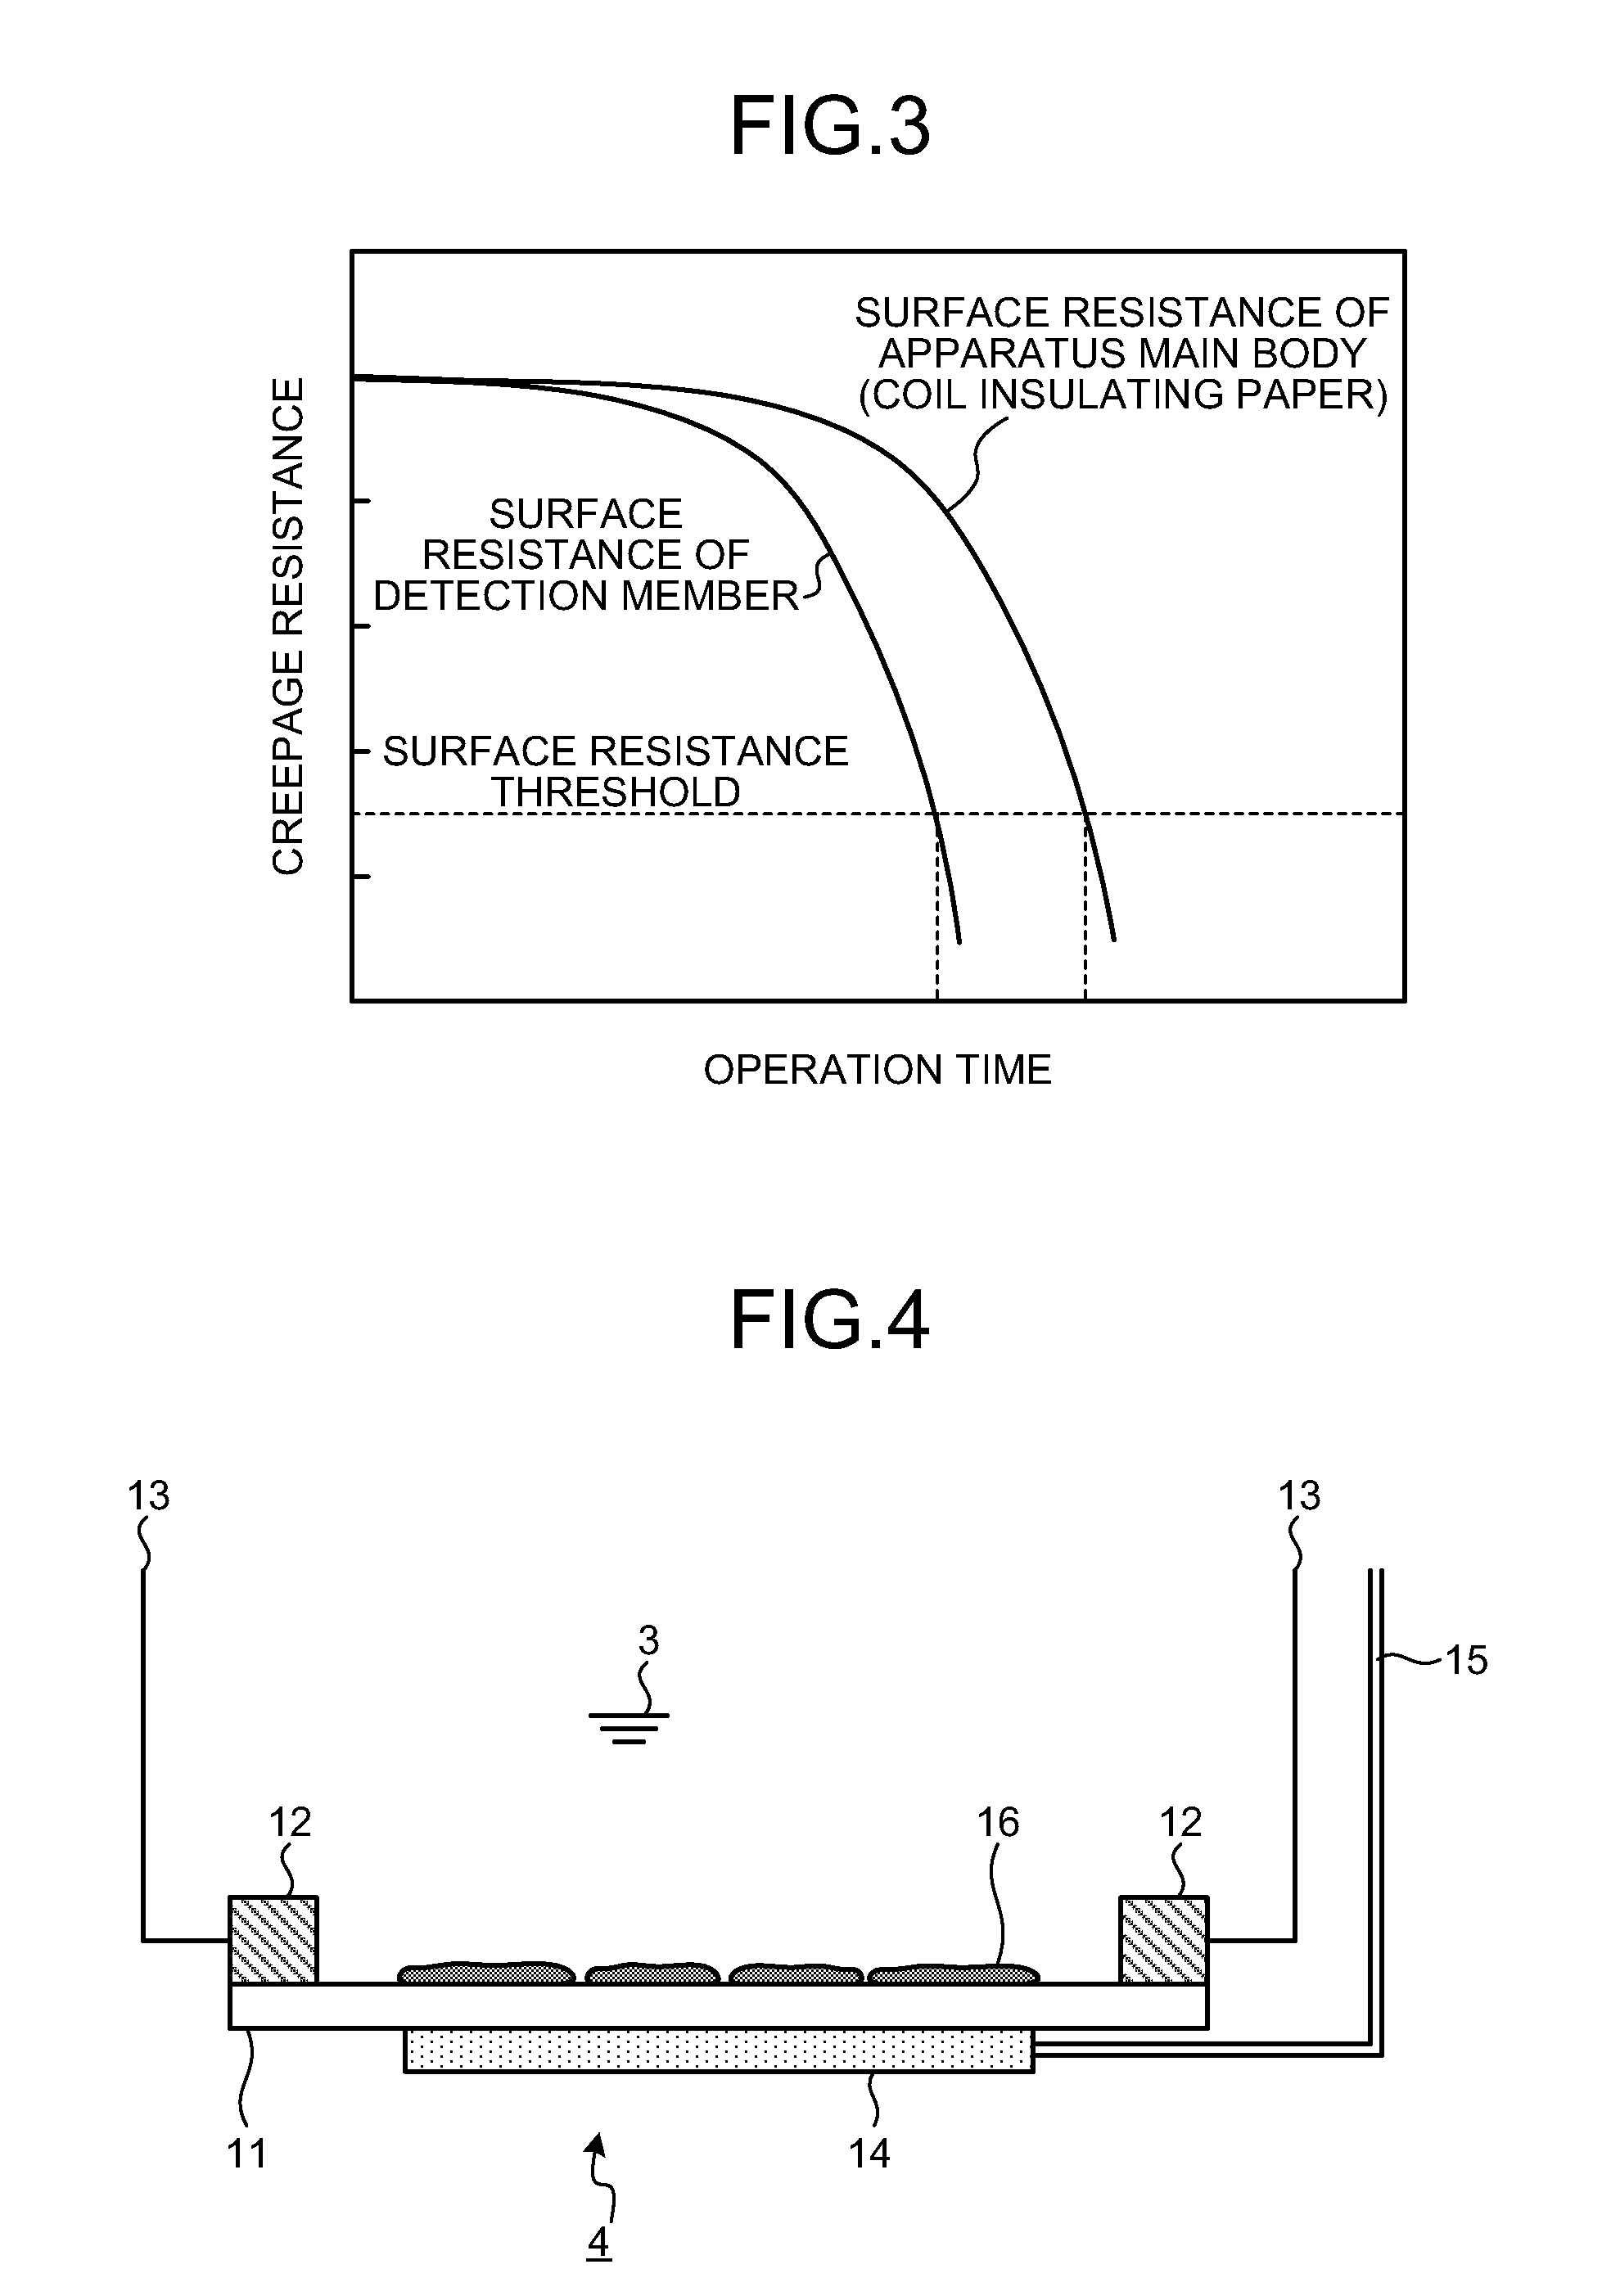 Oil immersed electrical apparatus